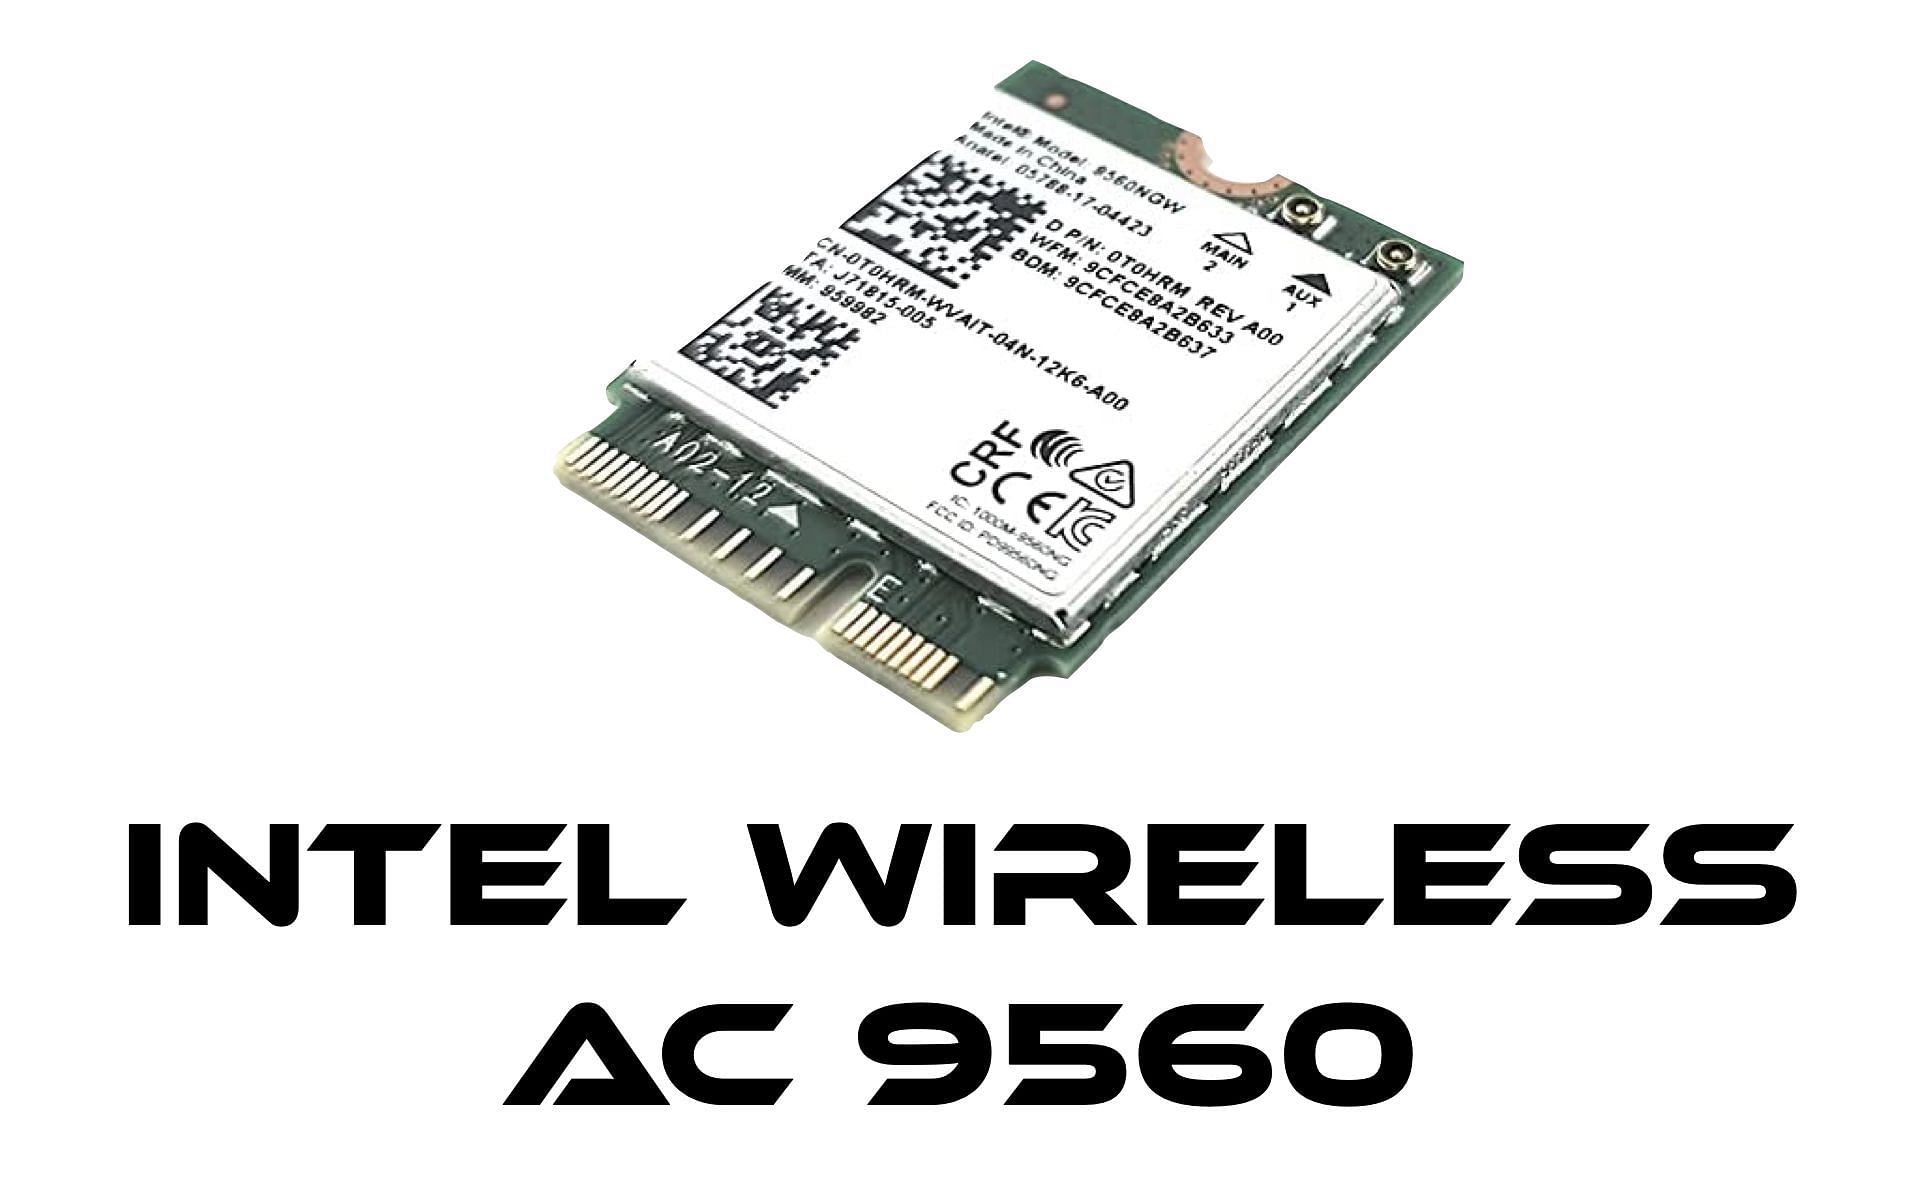 Intel wireless 9560 working: Possible causes, fixes, and more